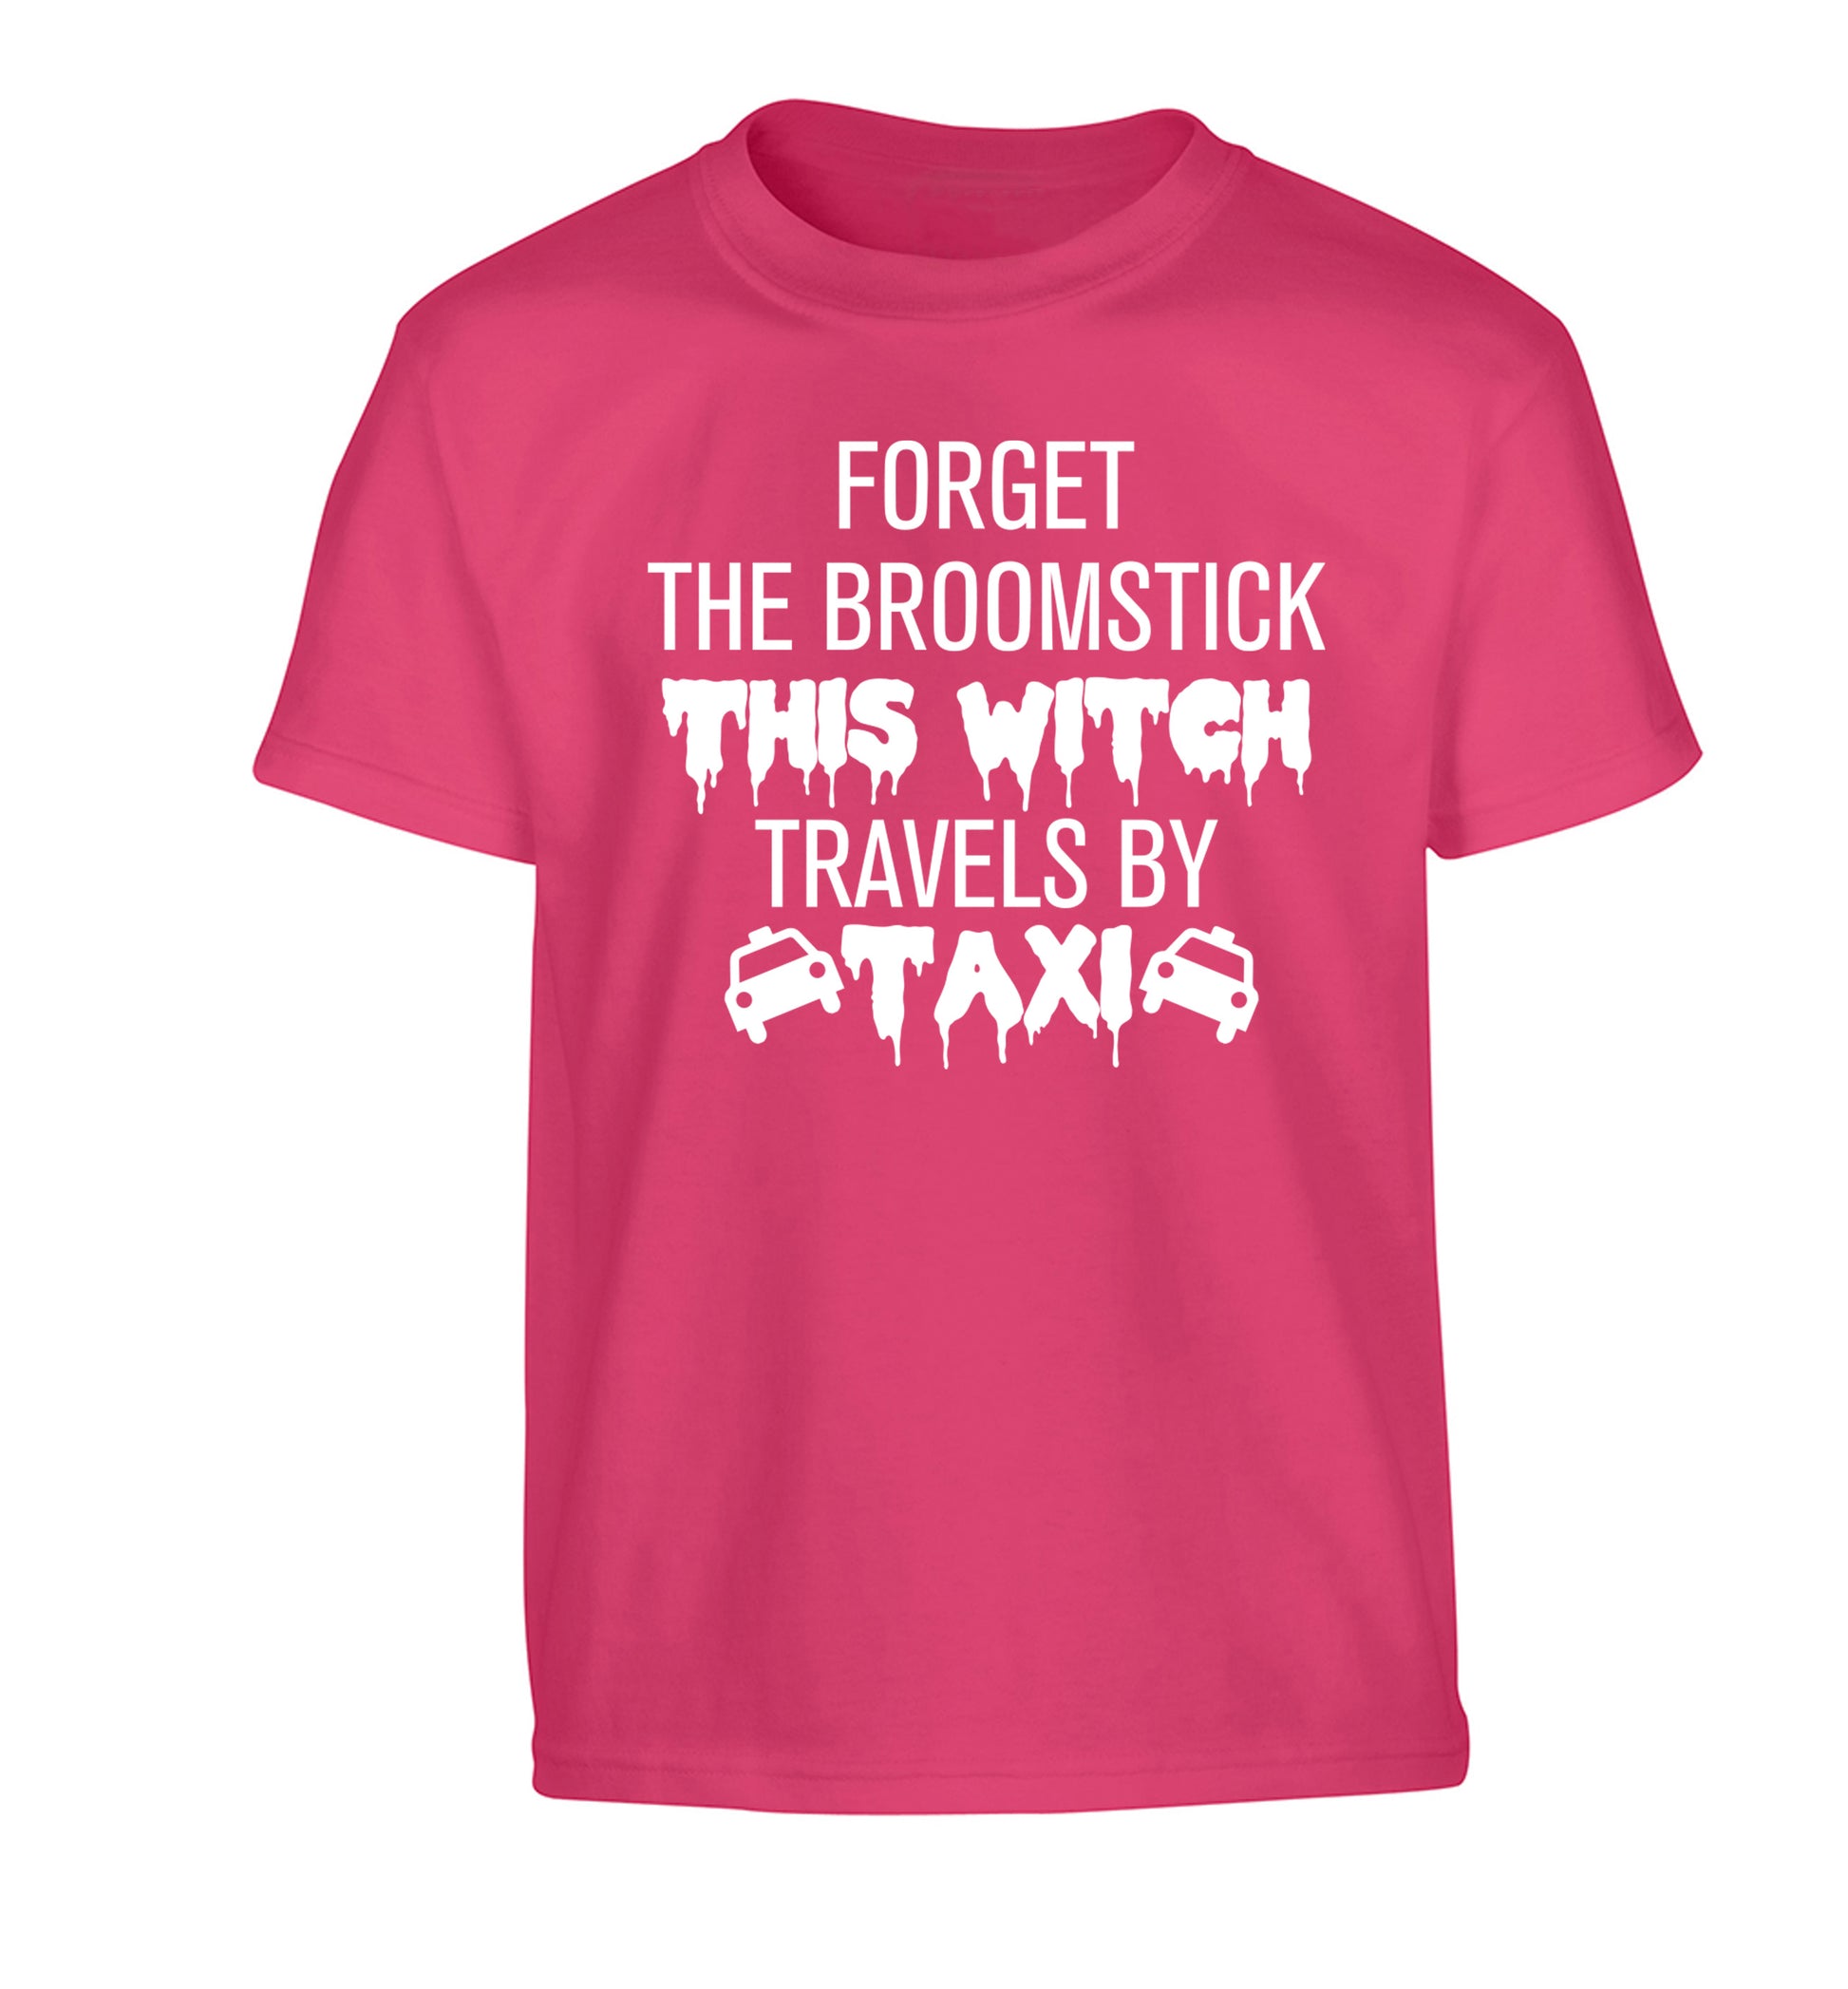 Forget the broomstick this witch travels by taxi Children's pink Tshirt 12-14 Years